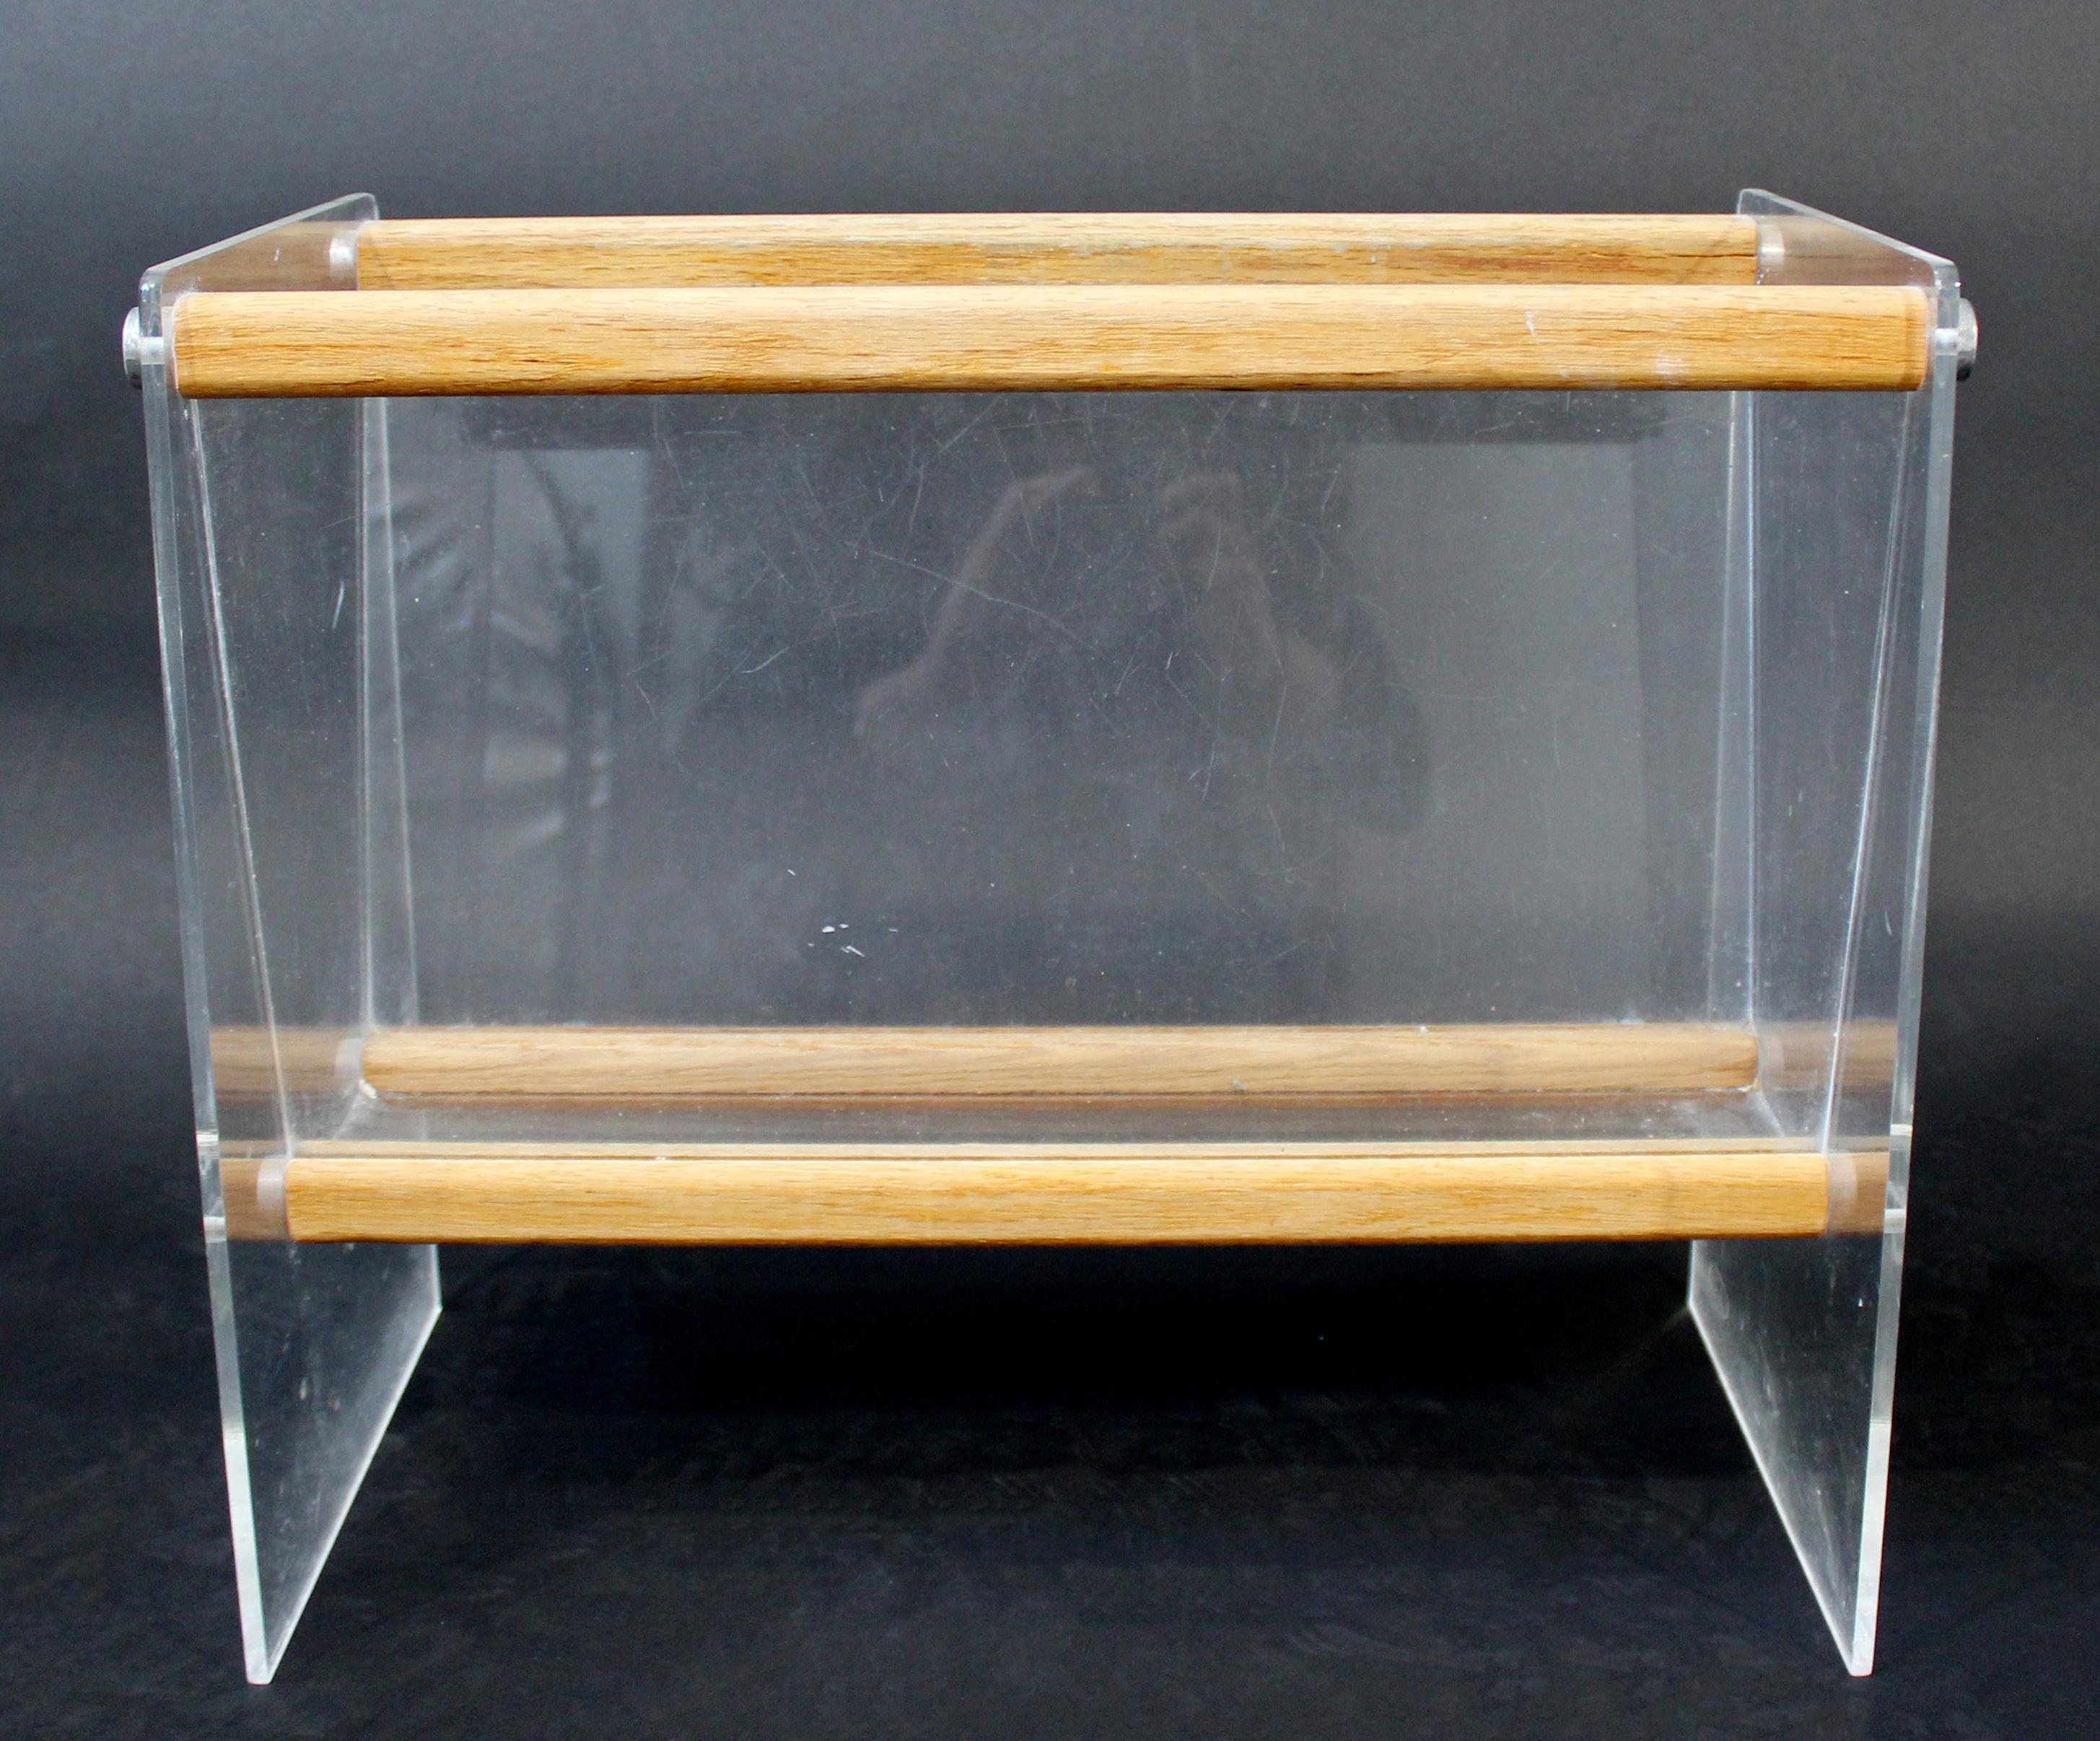 For your consideration is a superb, oak trimmed Lucite magazine rack, by Braeside Studios in Chicago, circa 1970s. In excellent vintage condition. The dimensions are 19